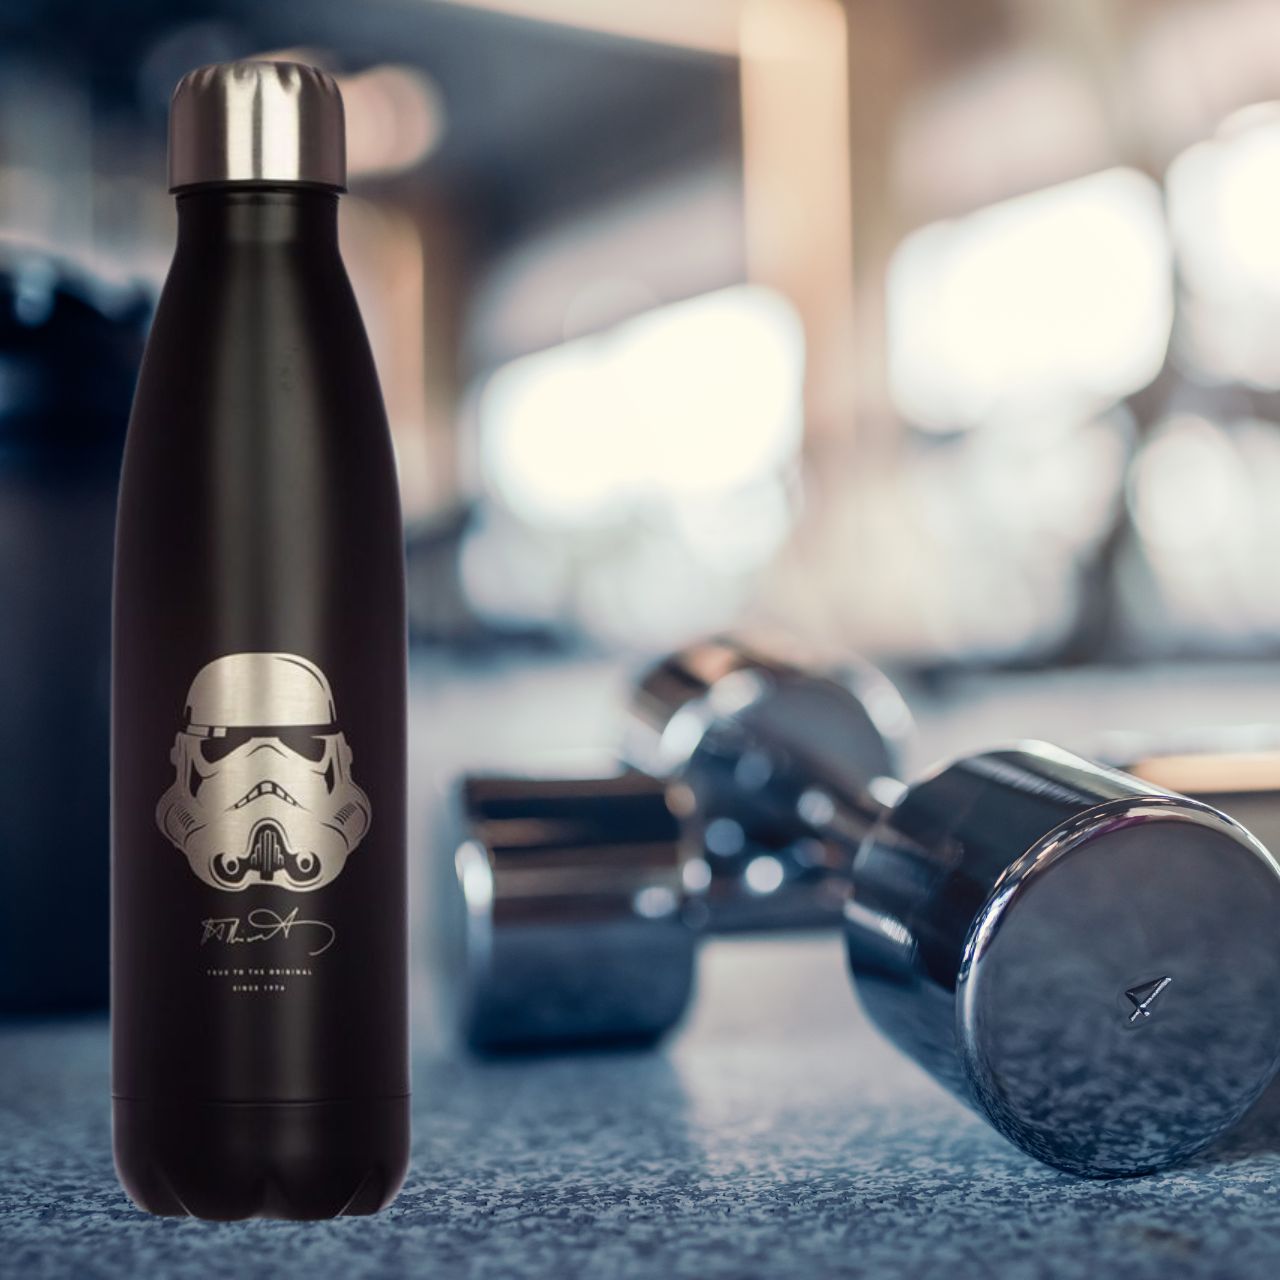 Designed for fans of the iconic Stormtrooper, this hot and cold drinks bottle keeps beverages at the perfect temperature with a 500ml capacity. A must-have for on-the-go hydration and showcasing your love for the Empire. Stay refreshed and stay loyal with this sleek black bottle.